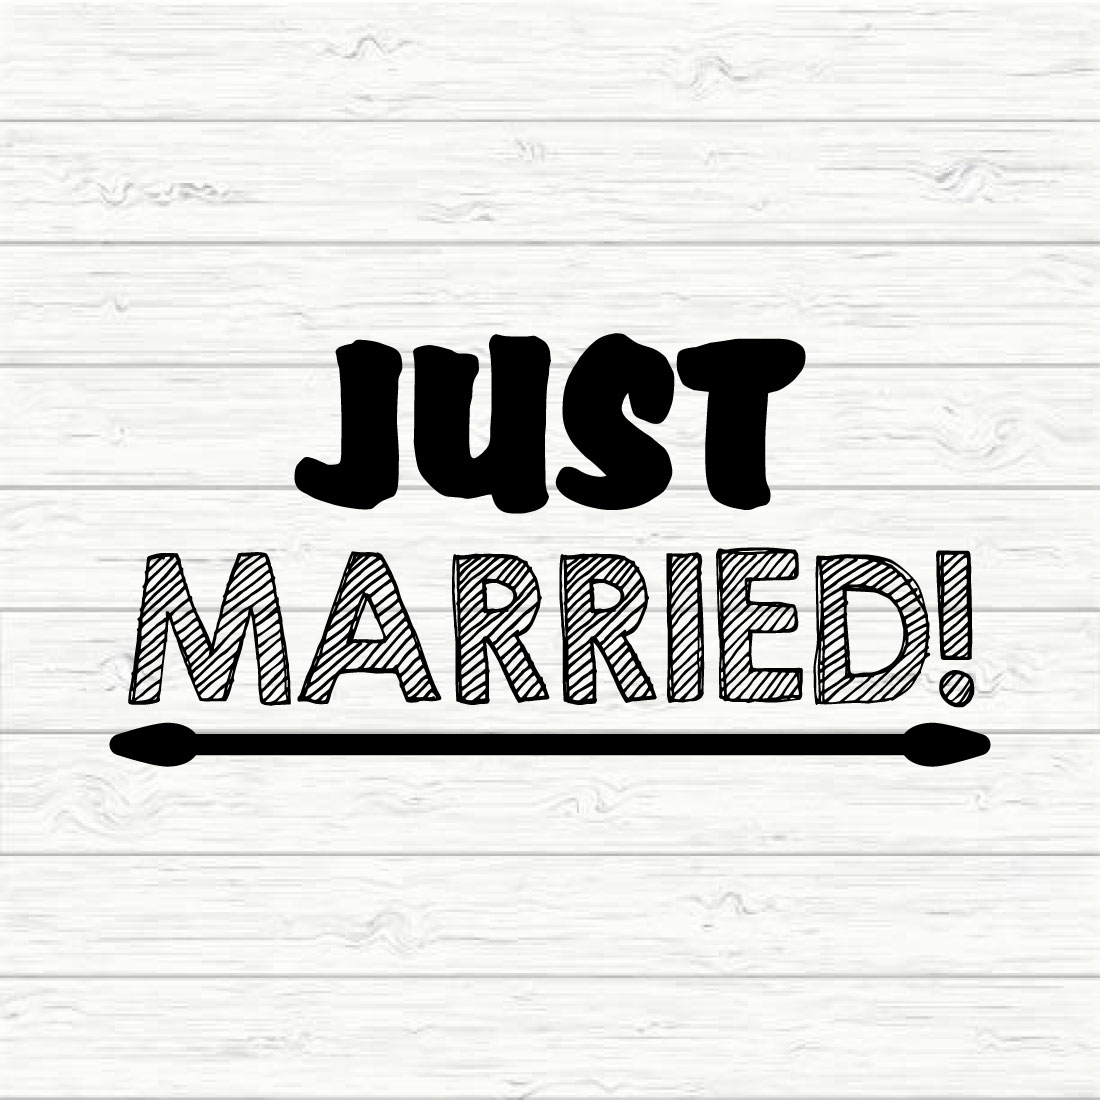 Just Married preview image.